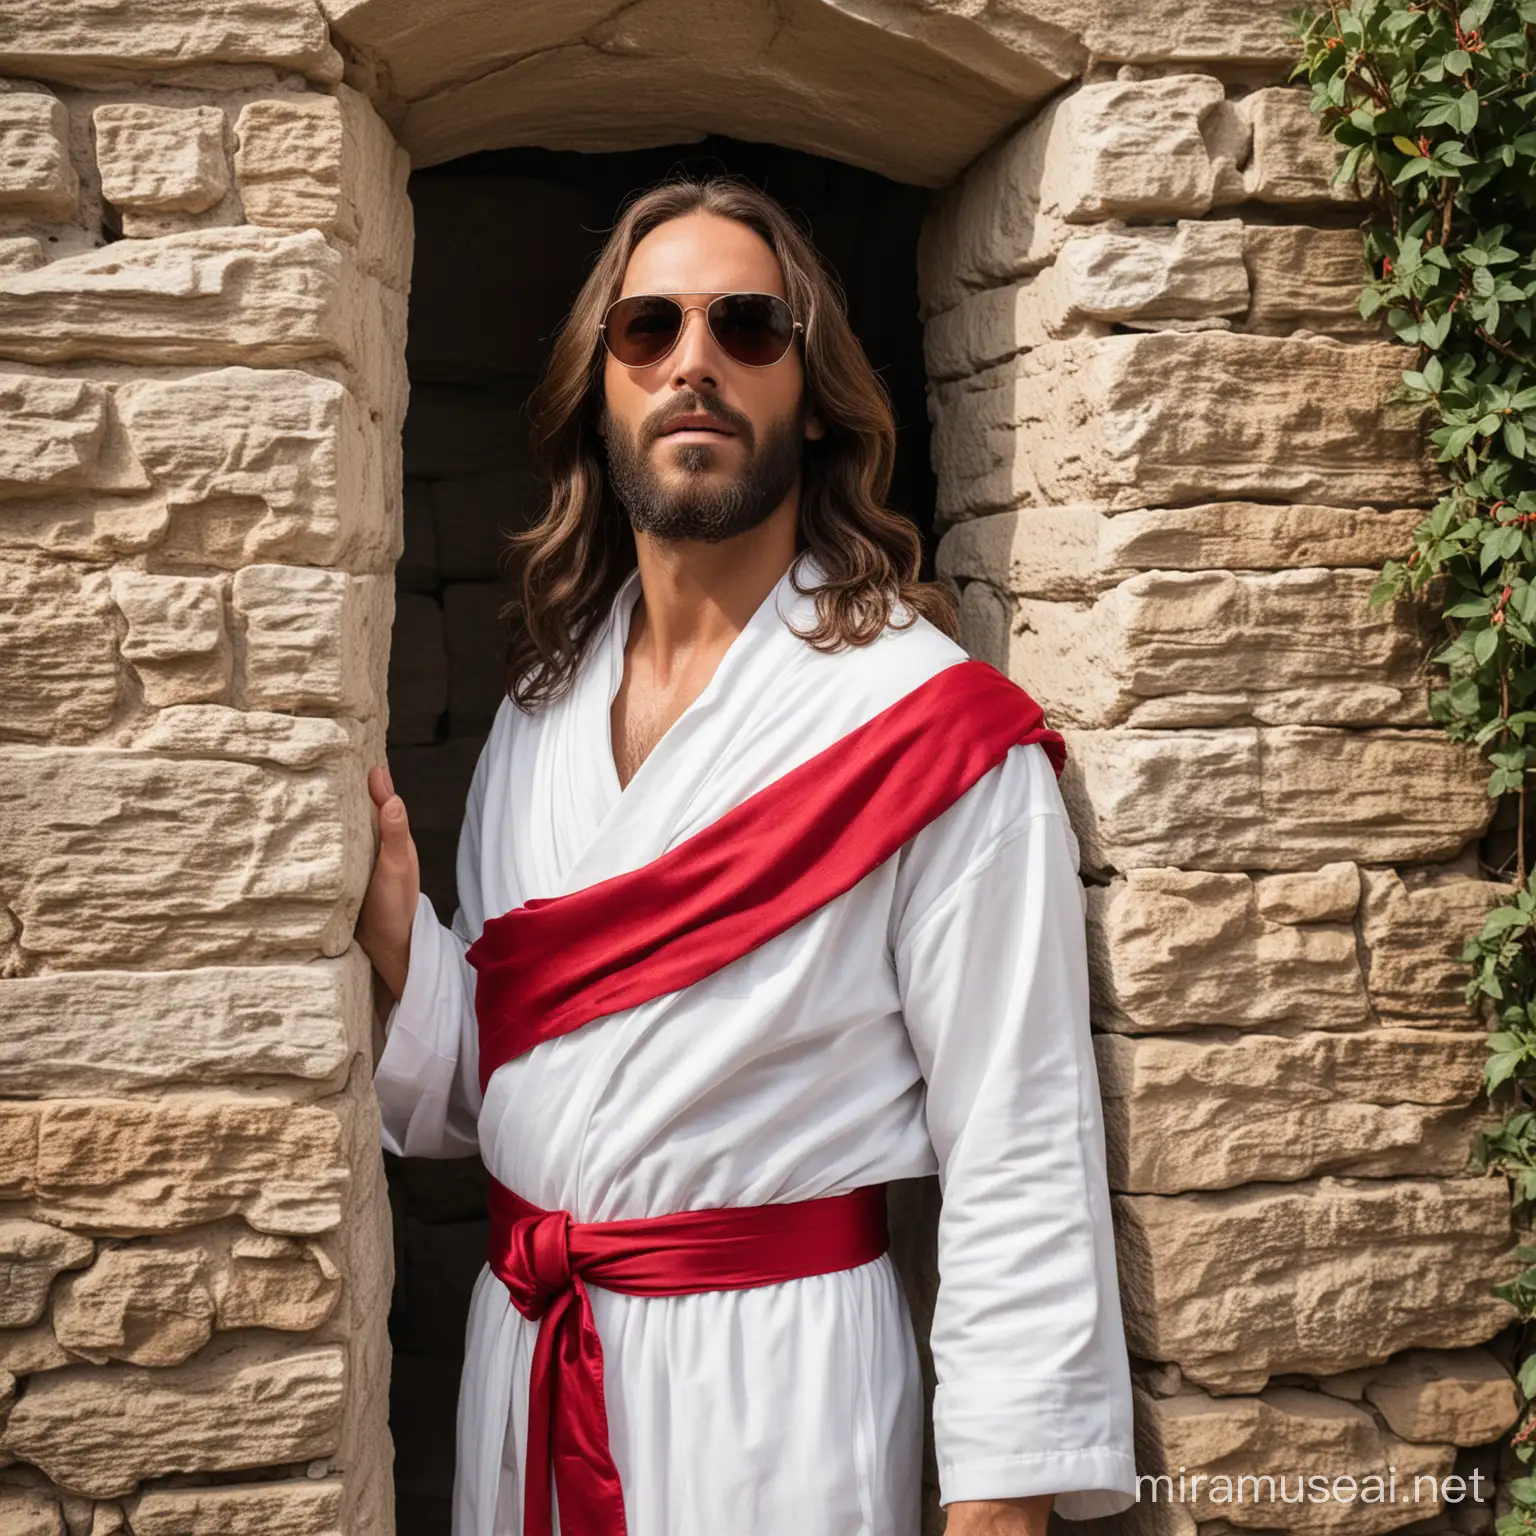 Resurrected Jesus in Aviator Sunglasses Emerges from Tomb